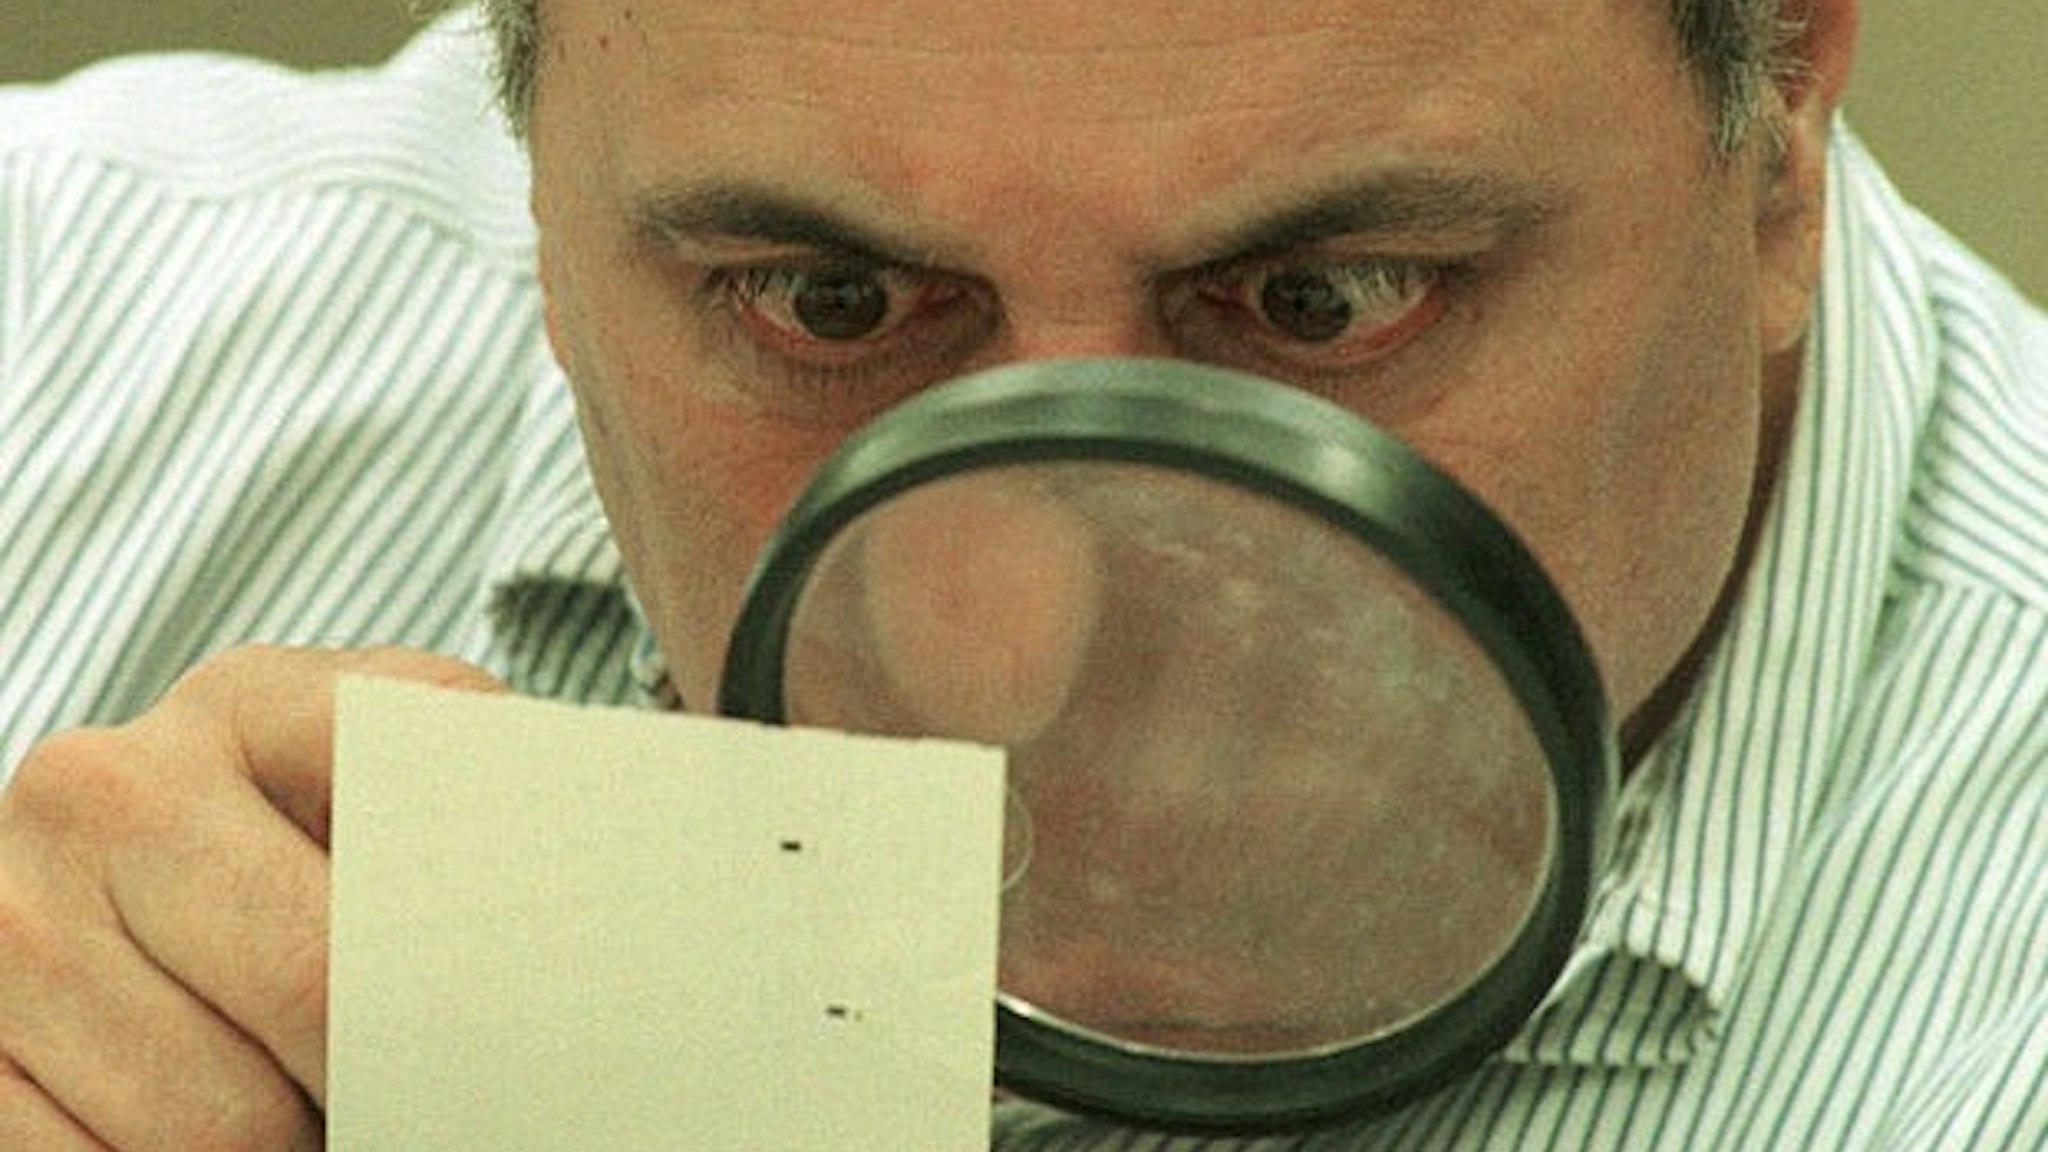 382382 01: Judge Robert Rosenberg of Broward County Canvassing Board uses a magnifying glass to view a dimpled chad on a punch-hole ballot November 24, 2000 during a recount of votes in Fort Lauderdale, Florida. The Broward County Canvassing Board will continue their recount of ballots until the November 26, 2000 deadline set by the Florida State Supreme Court. (Photo by